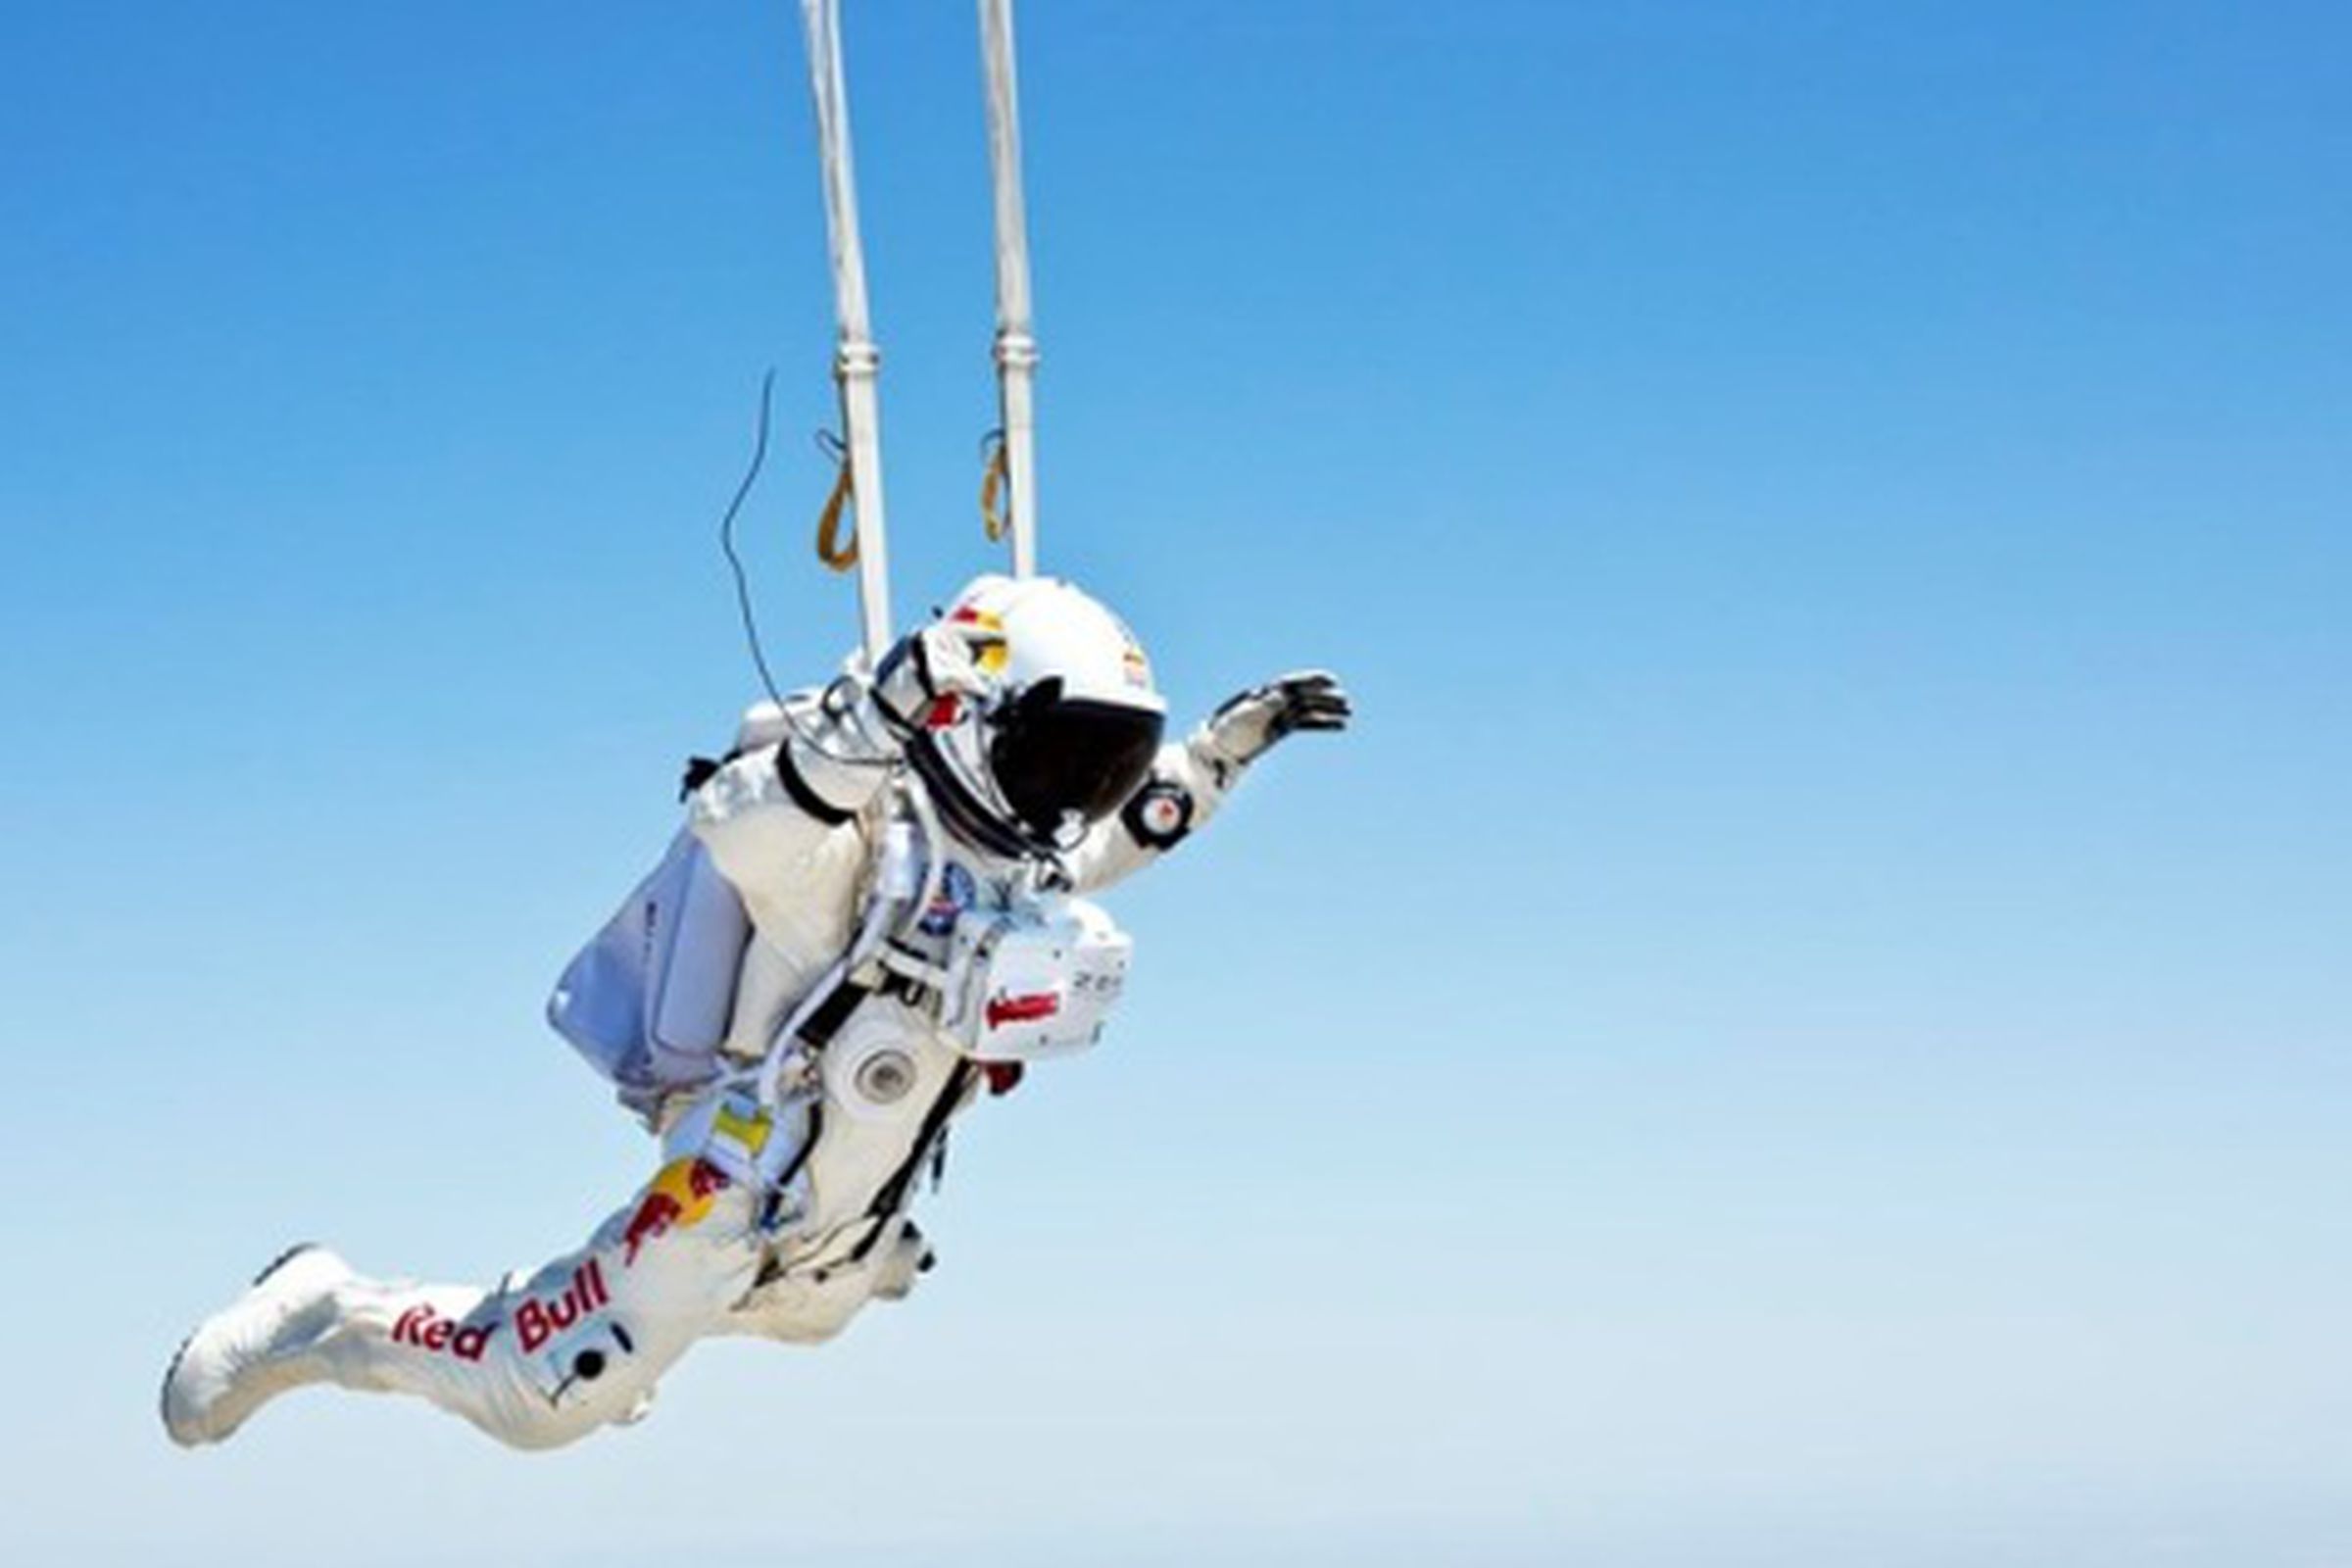 Red Bull supersonic free fall